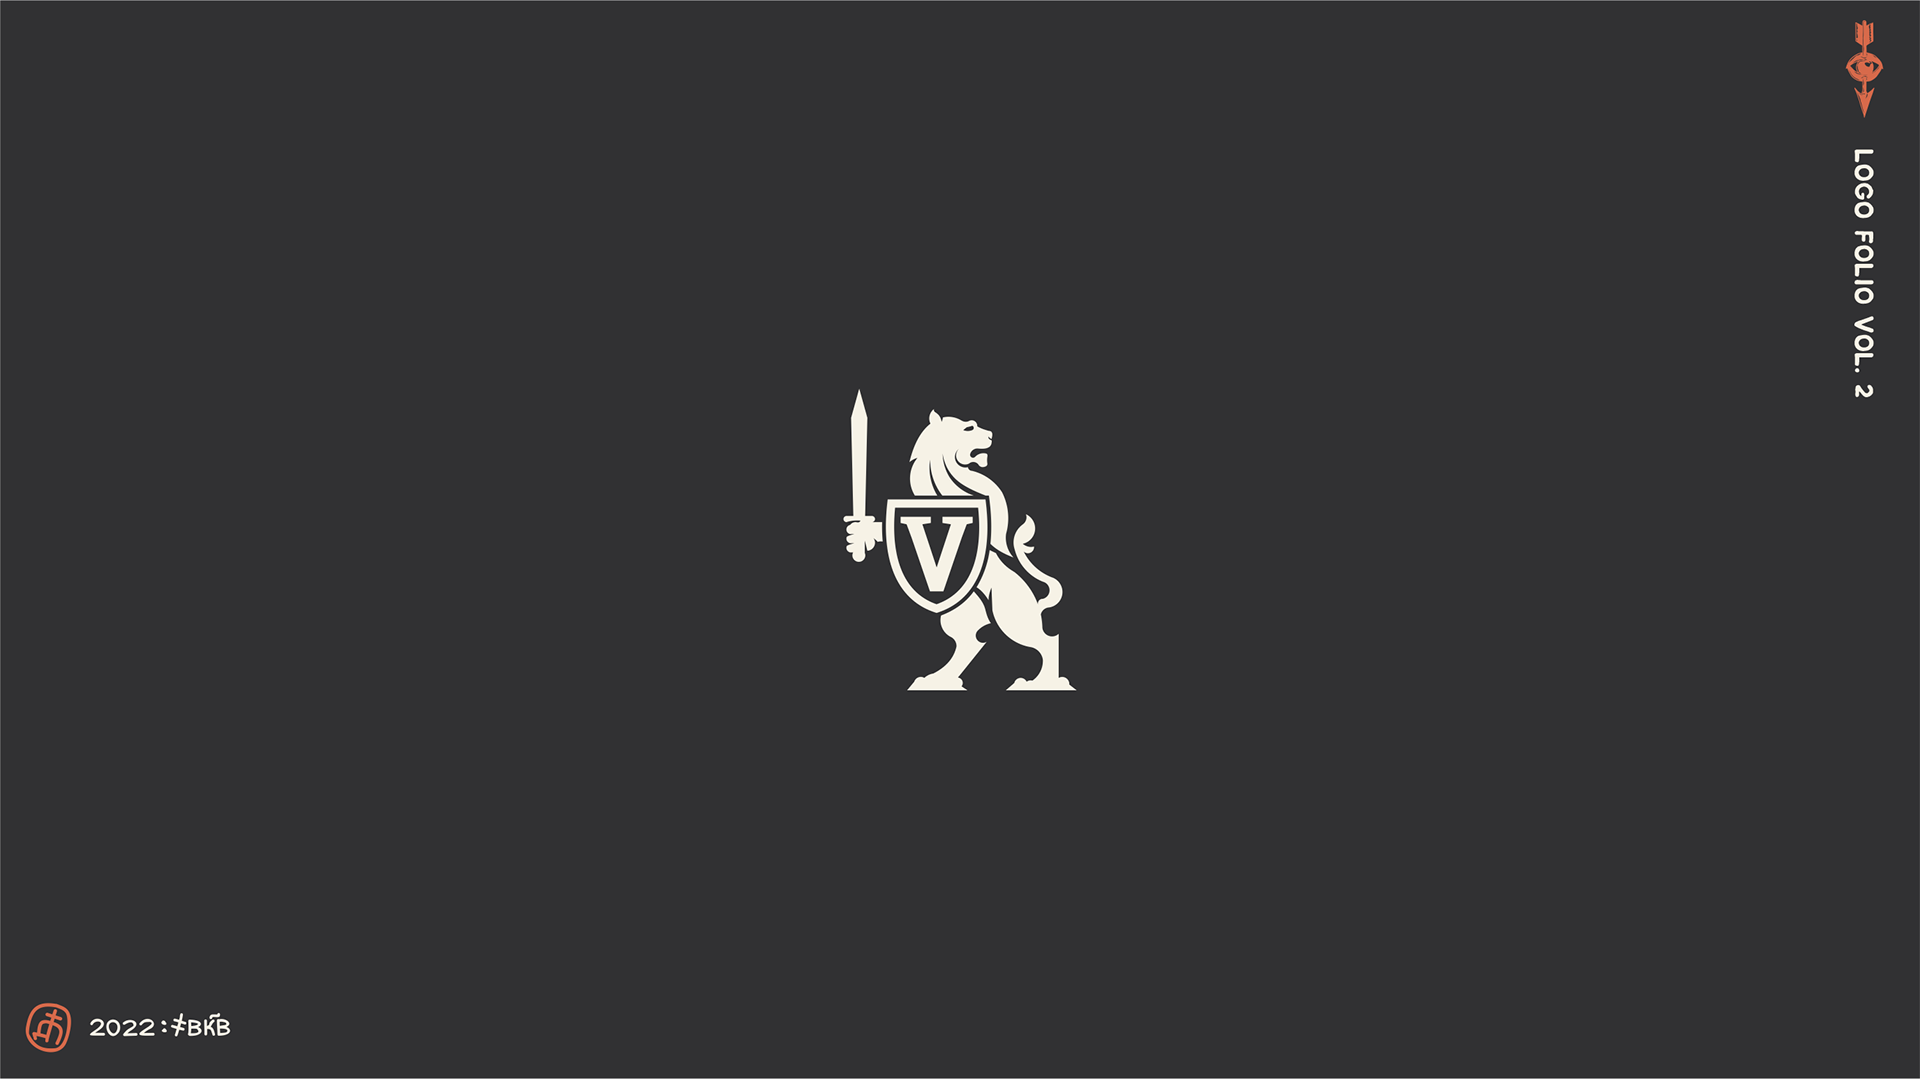 Heraldic lion logo for Valor,  holding a shield with V in one, and a sword in the other hand